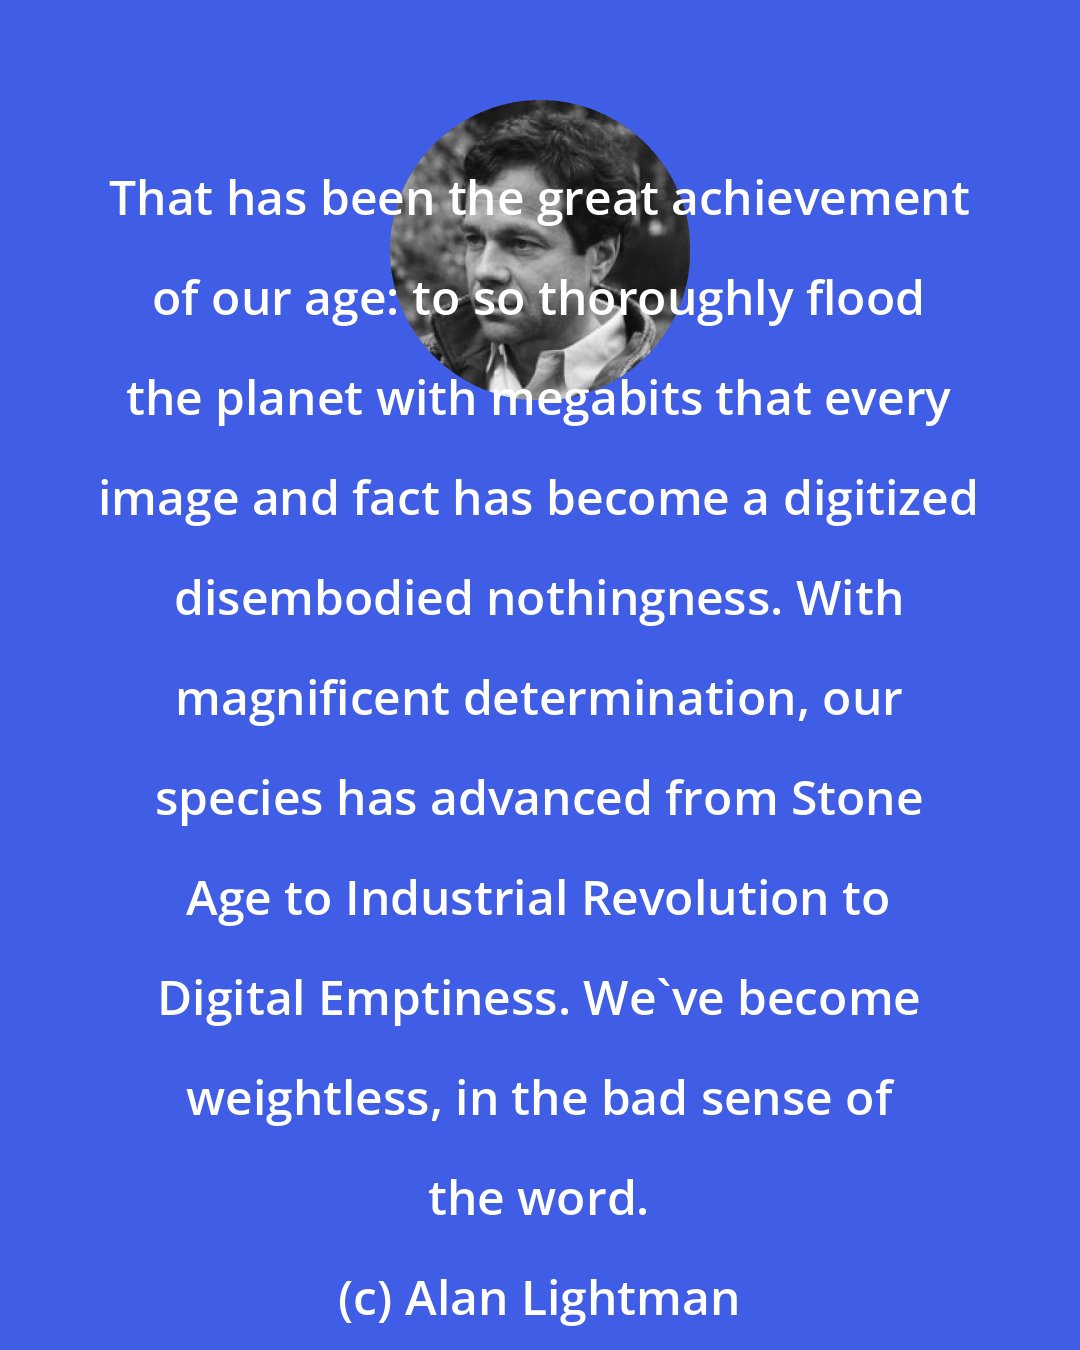 Alan Lightman: That has been the great achievement of our age: to so thoroughly flood the planet with megabits that every image and fact has become a digitized disembodied nothingness. With magnificent determination, our species has advanced from Stone Age to Industrial Revolution to Digital Emptiness. We've become weightless, in the bad sense of the word.